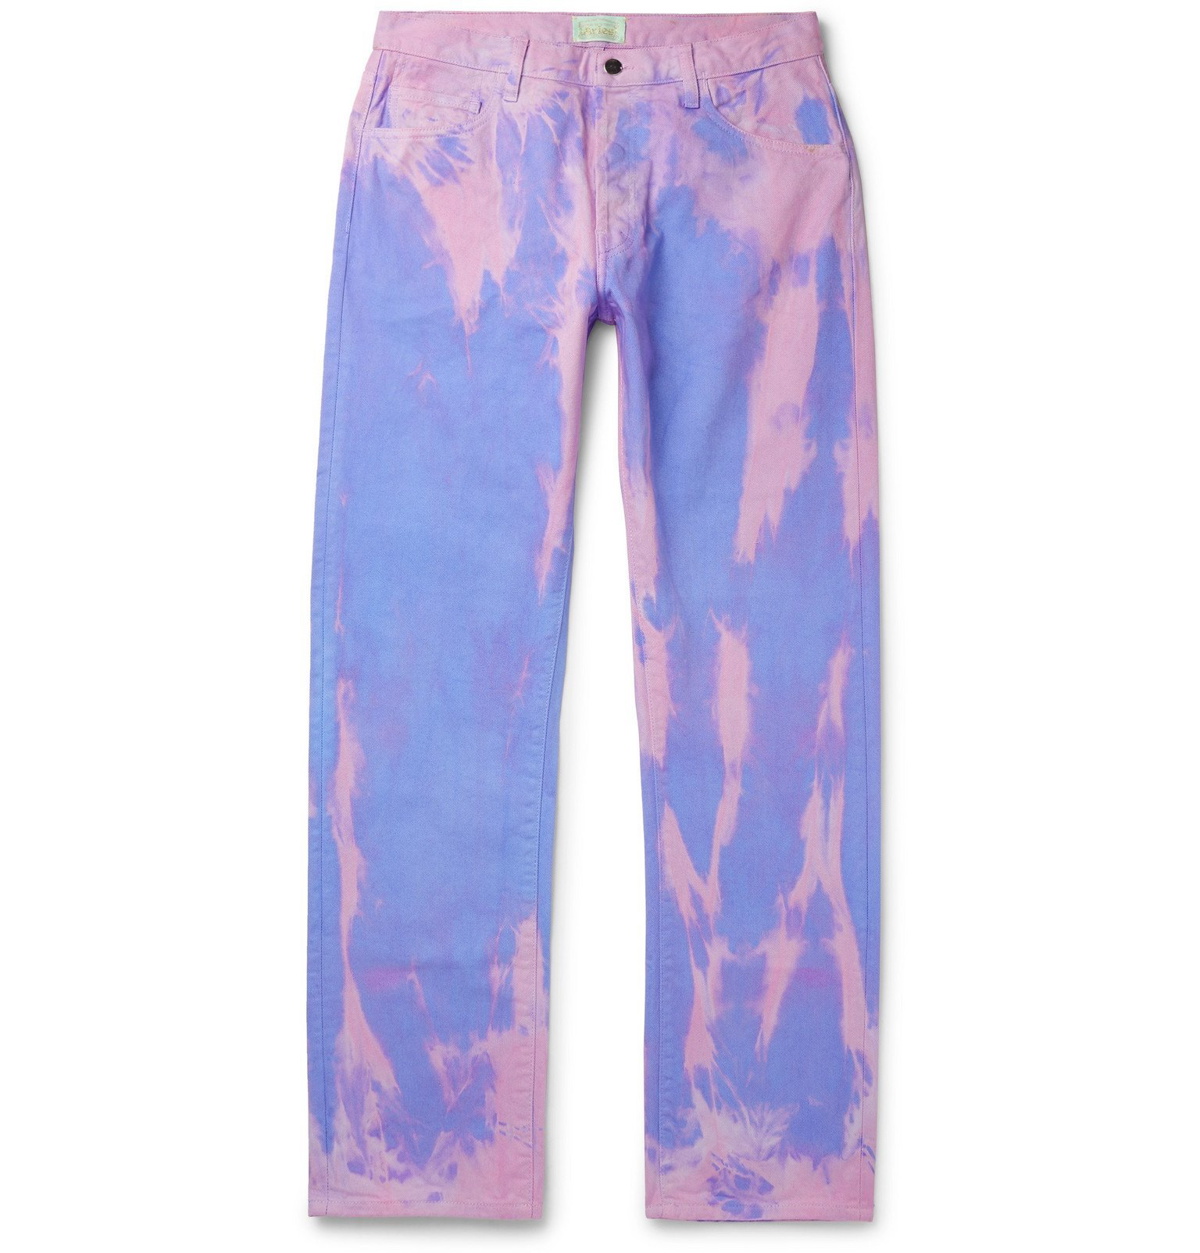 Aries - Lilly Tie-Dyed Denim Jeans - Pink ARIES